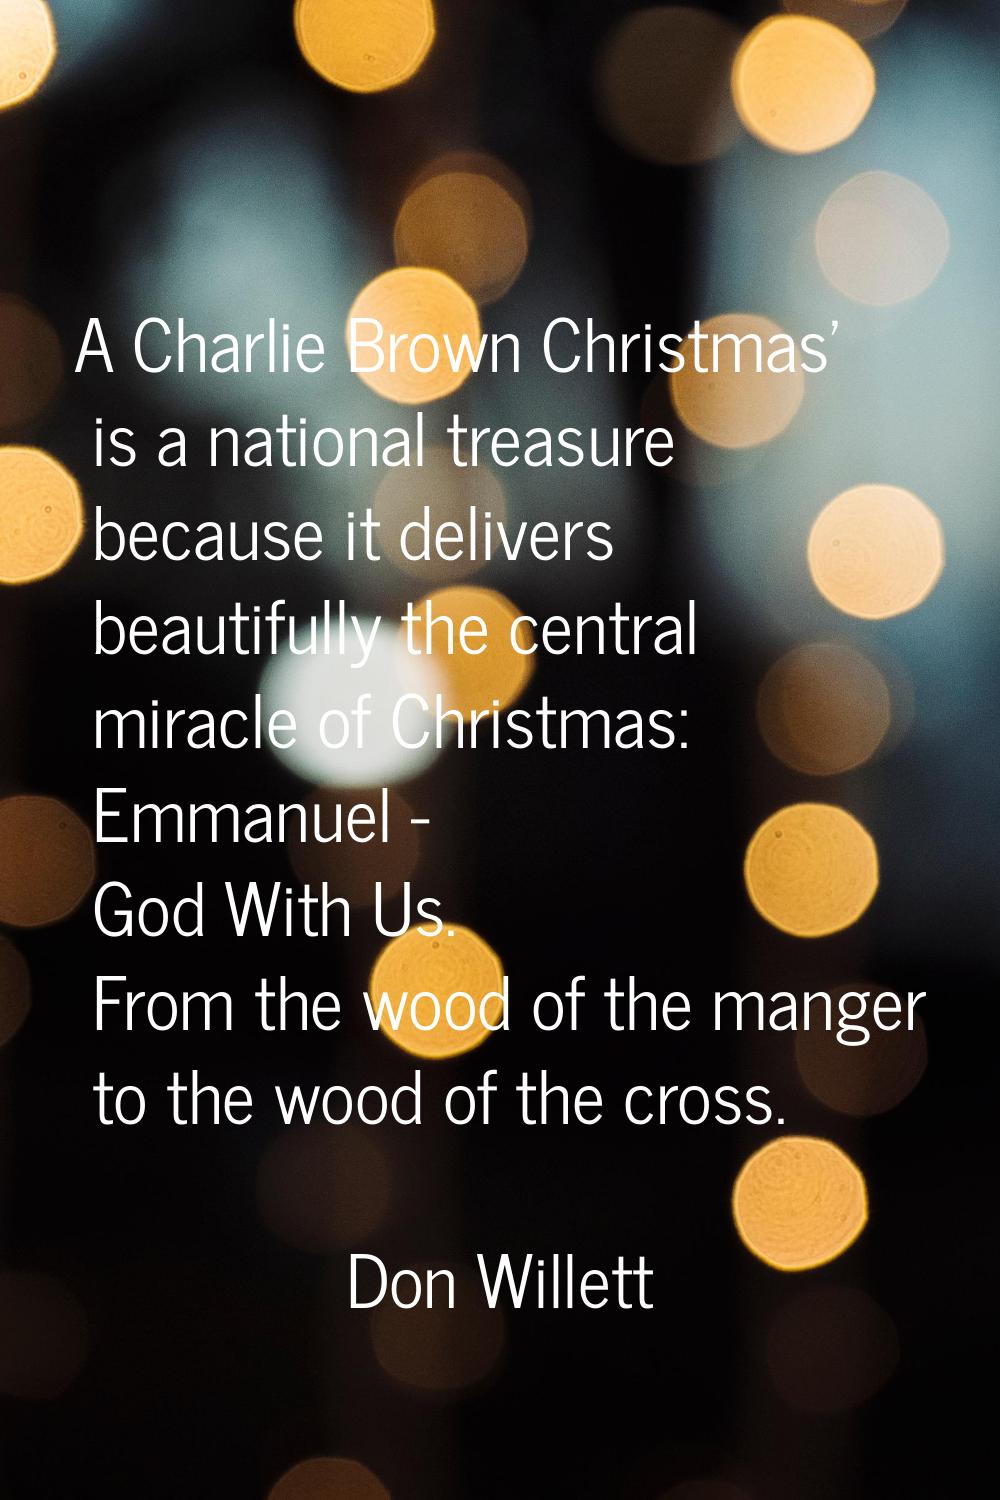 A Charlie Brown Christmas' is a national treasure because it delivers beautifully the central mirac